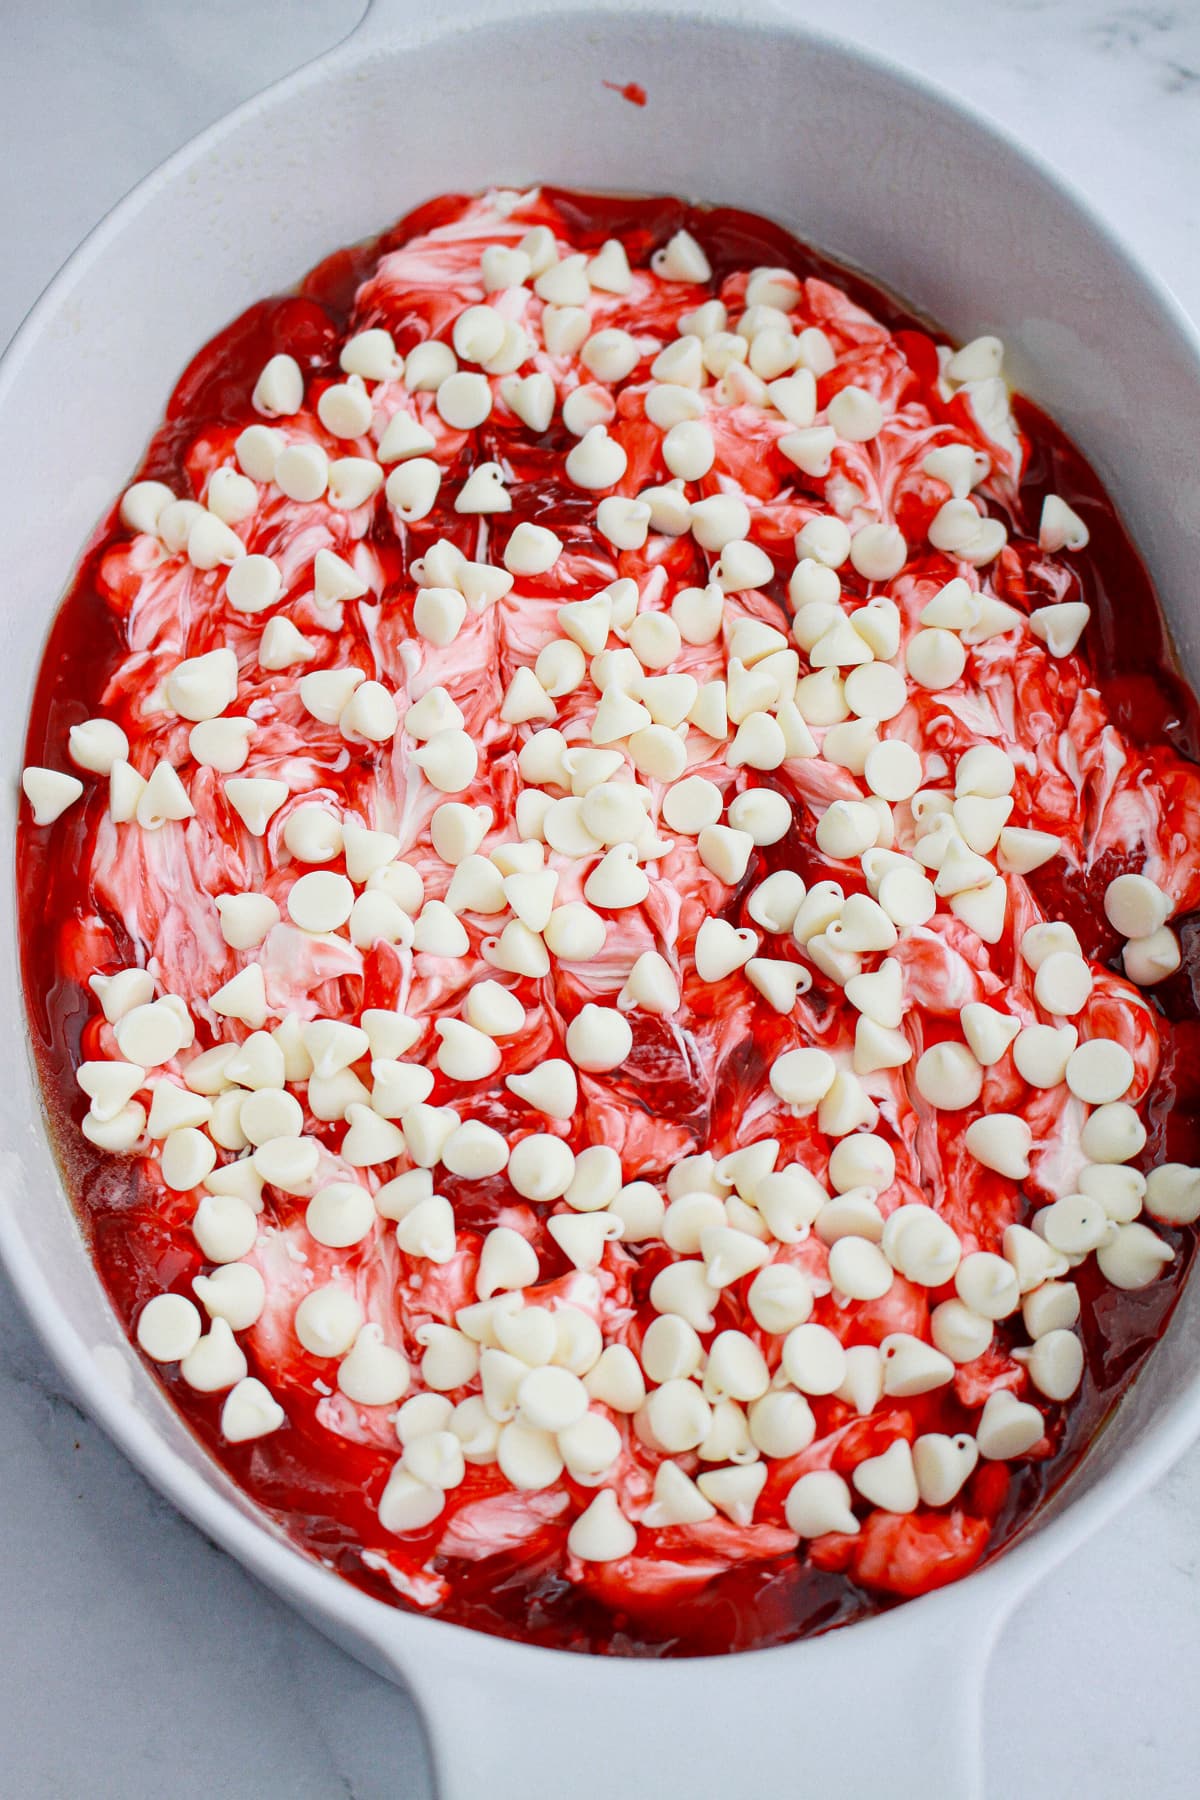 white chocolate chips on top of strawberry pie filling for dump cake